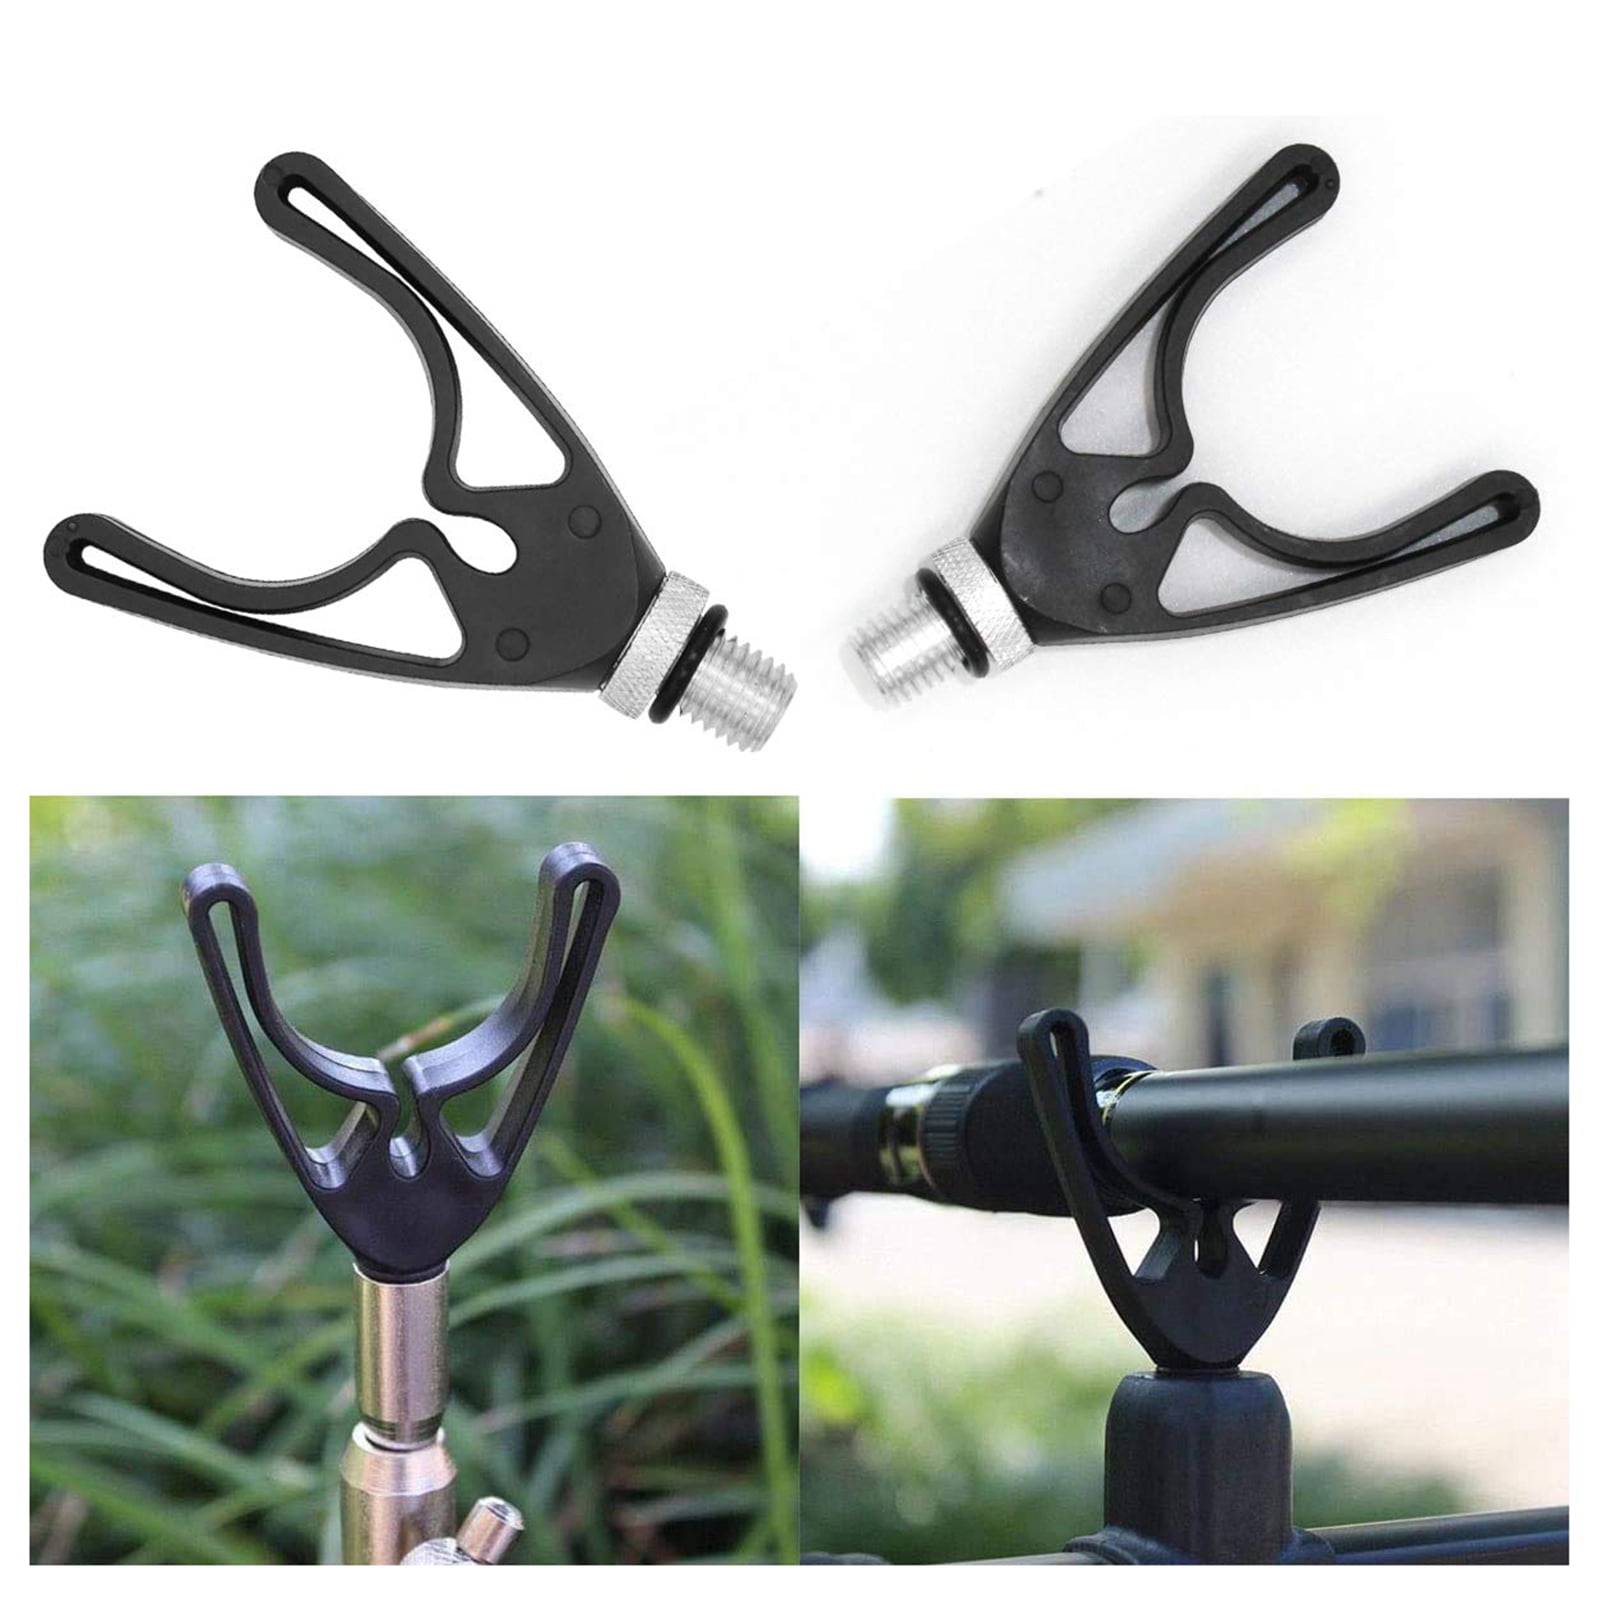 Grips Carp Rod Rest Bracket with Clip MagiDeal 2 Pieces Adjustable Plastic Fishing Tackle Butt Rests